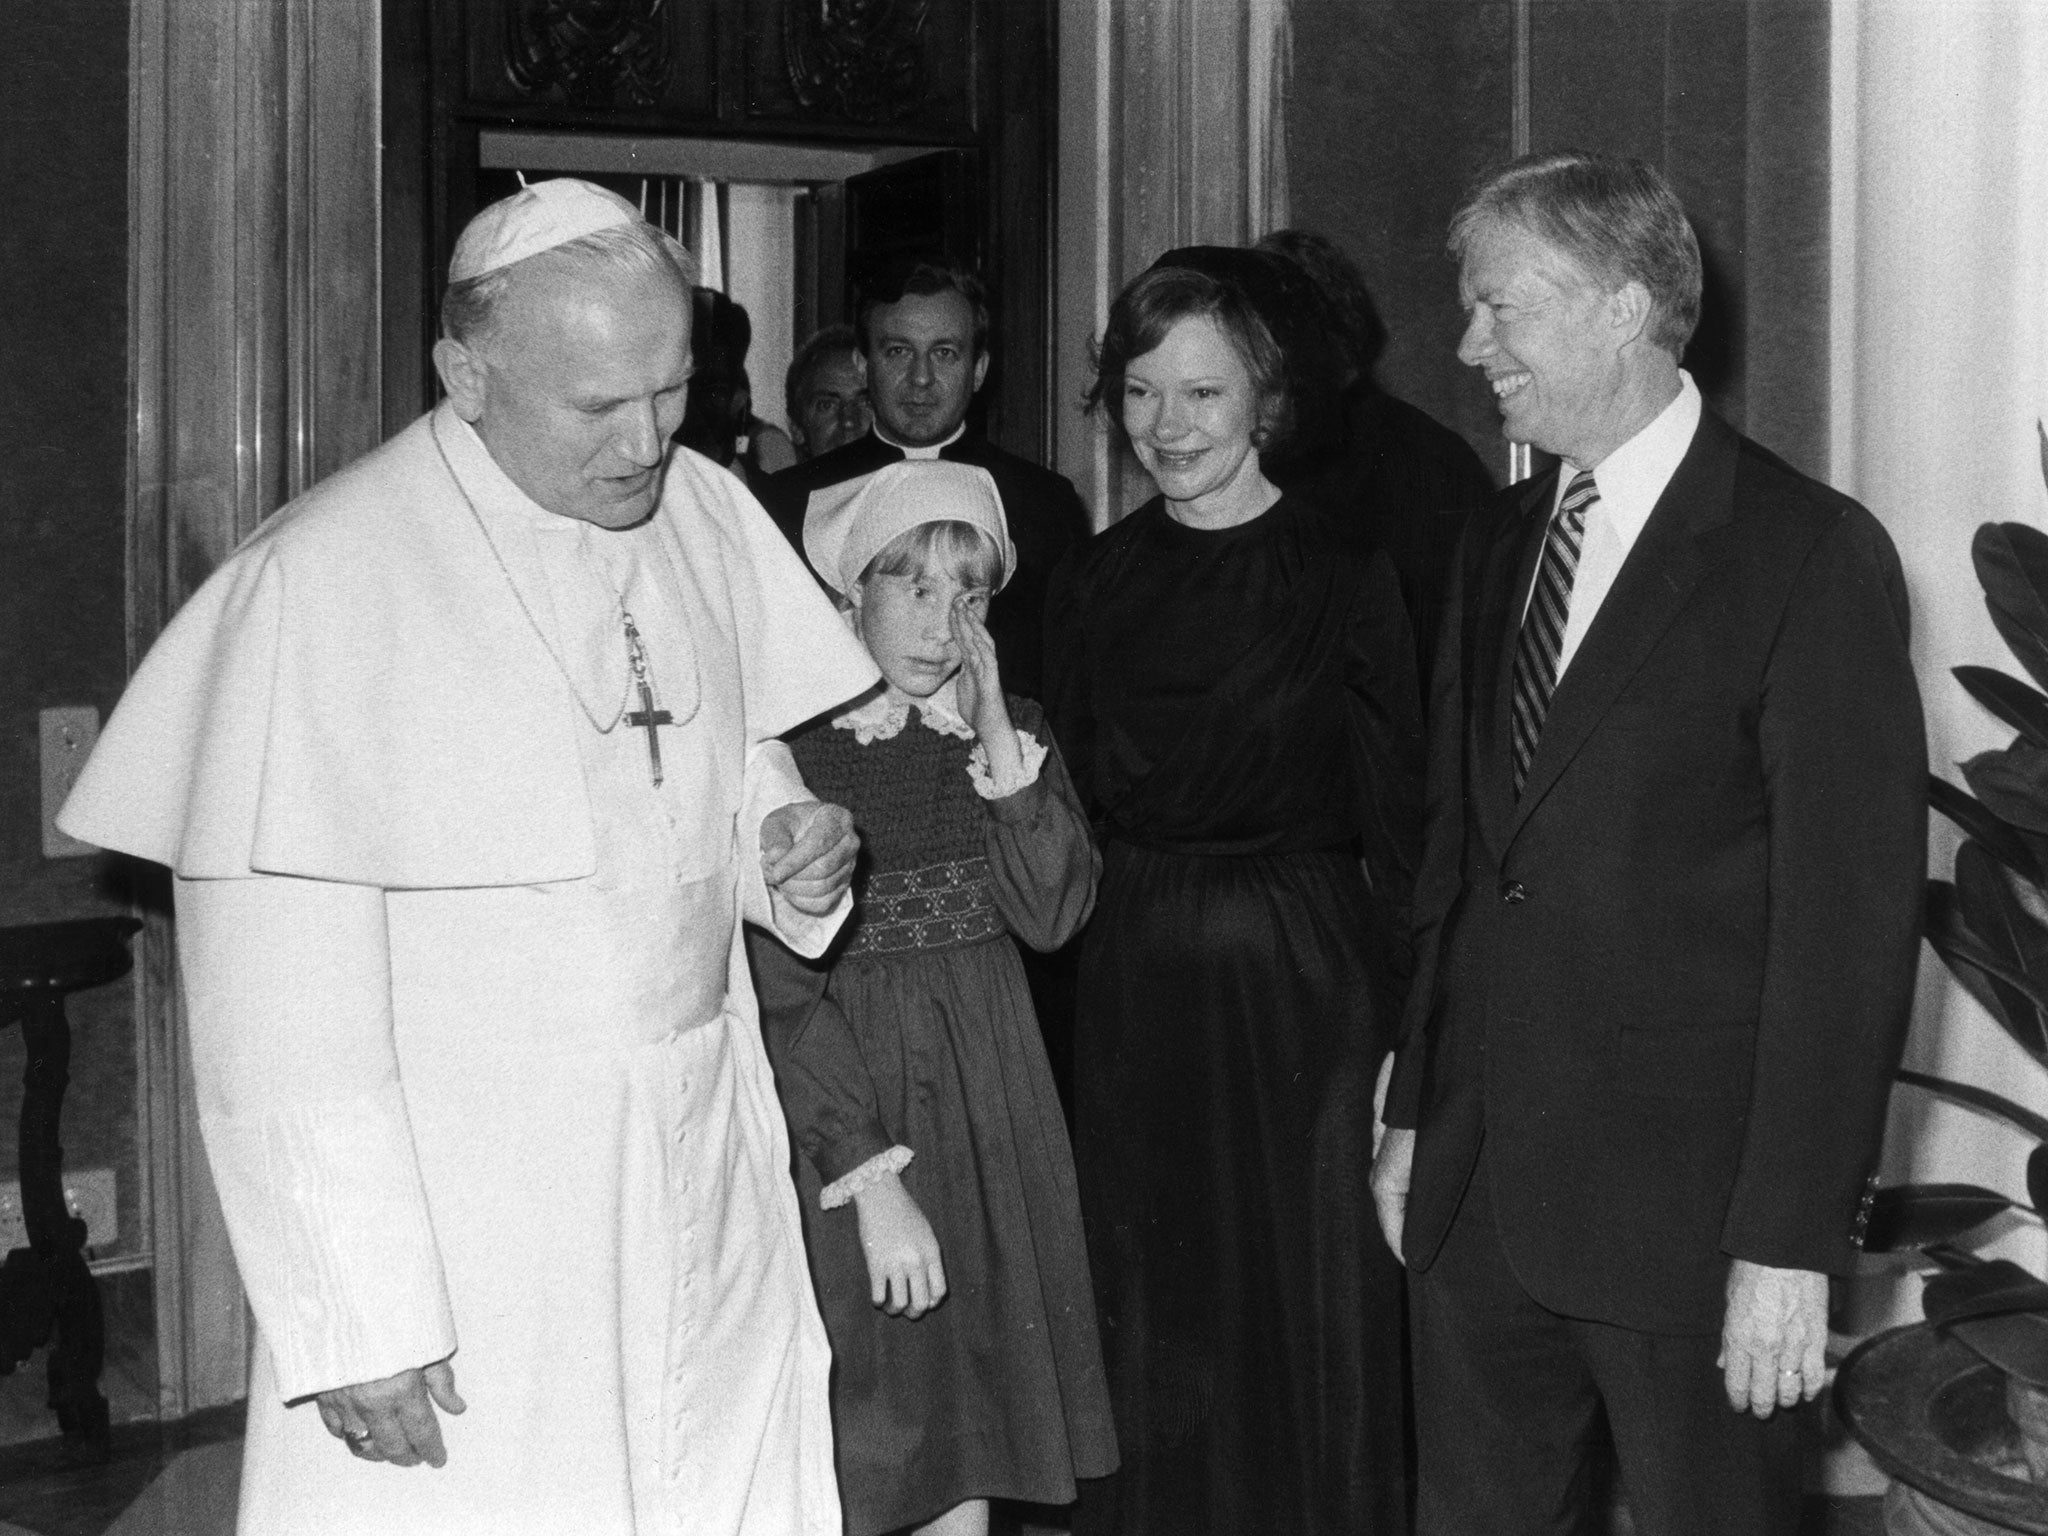 Jimmy Cater and family meet the Pope John Paul II in Rome, 1976